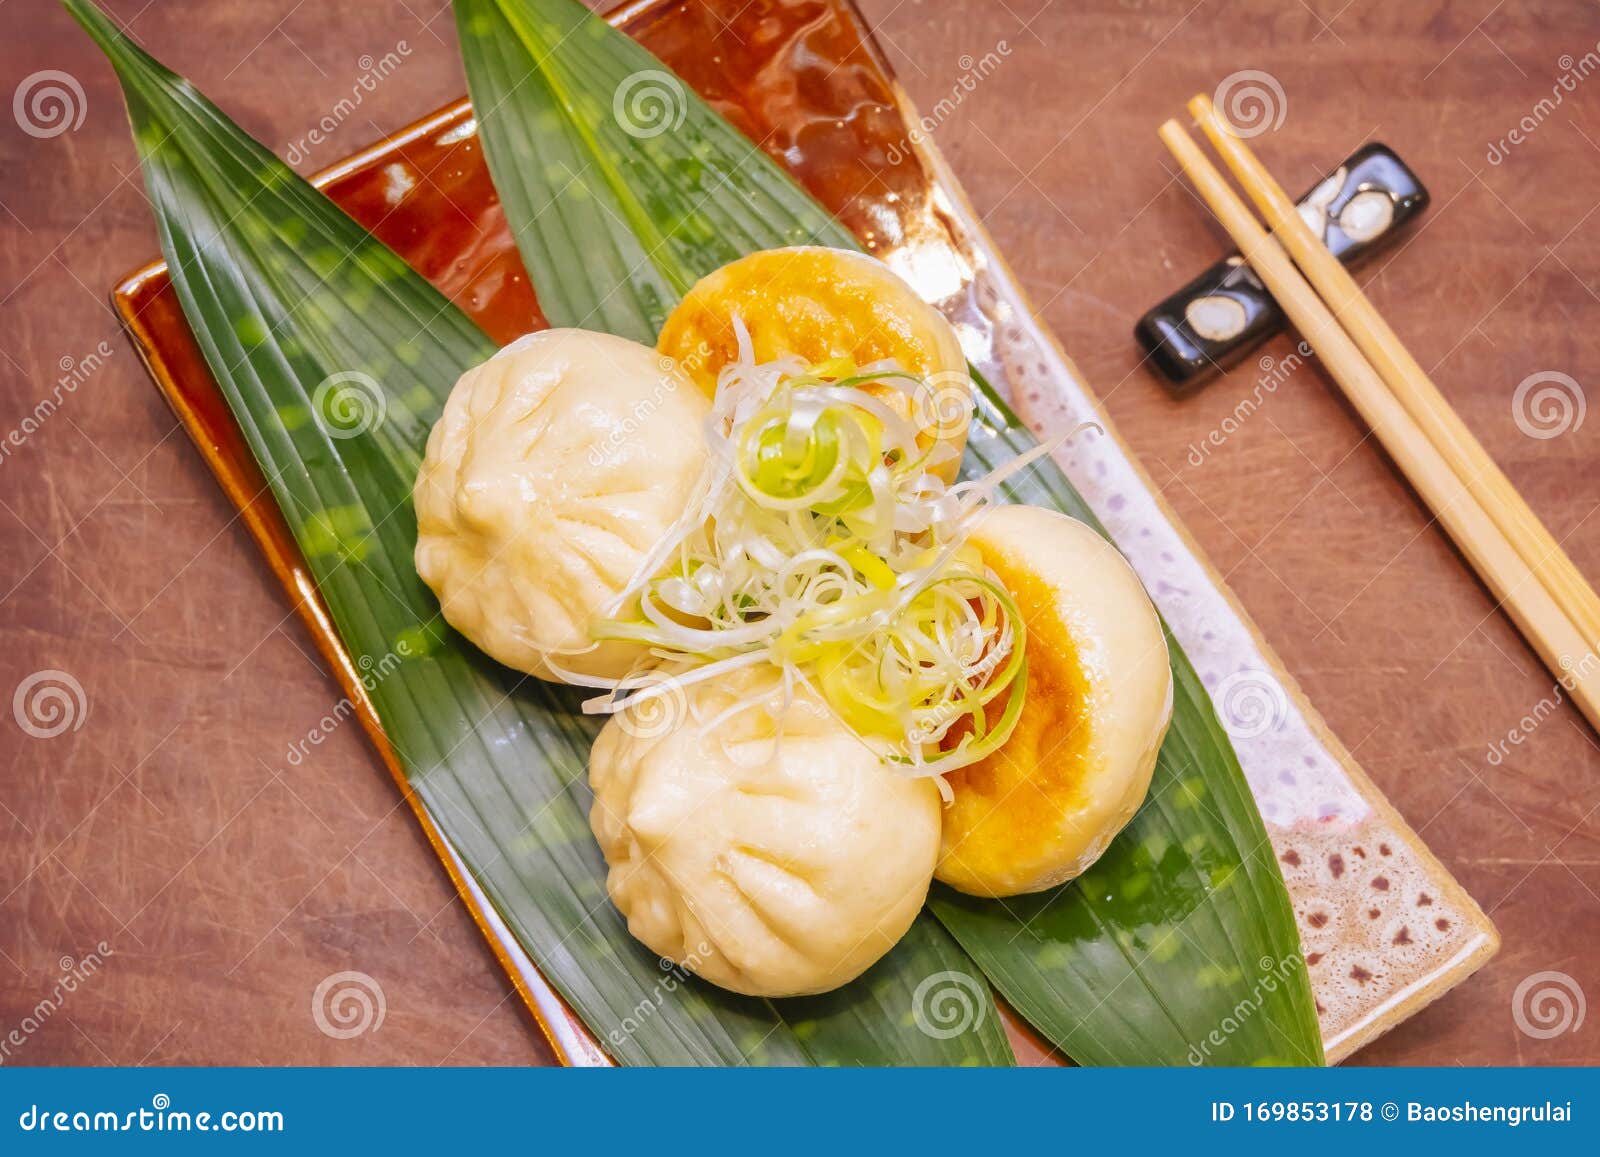 Chinese Fried Bun On The Table Stock Photo Image Of Flour